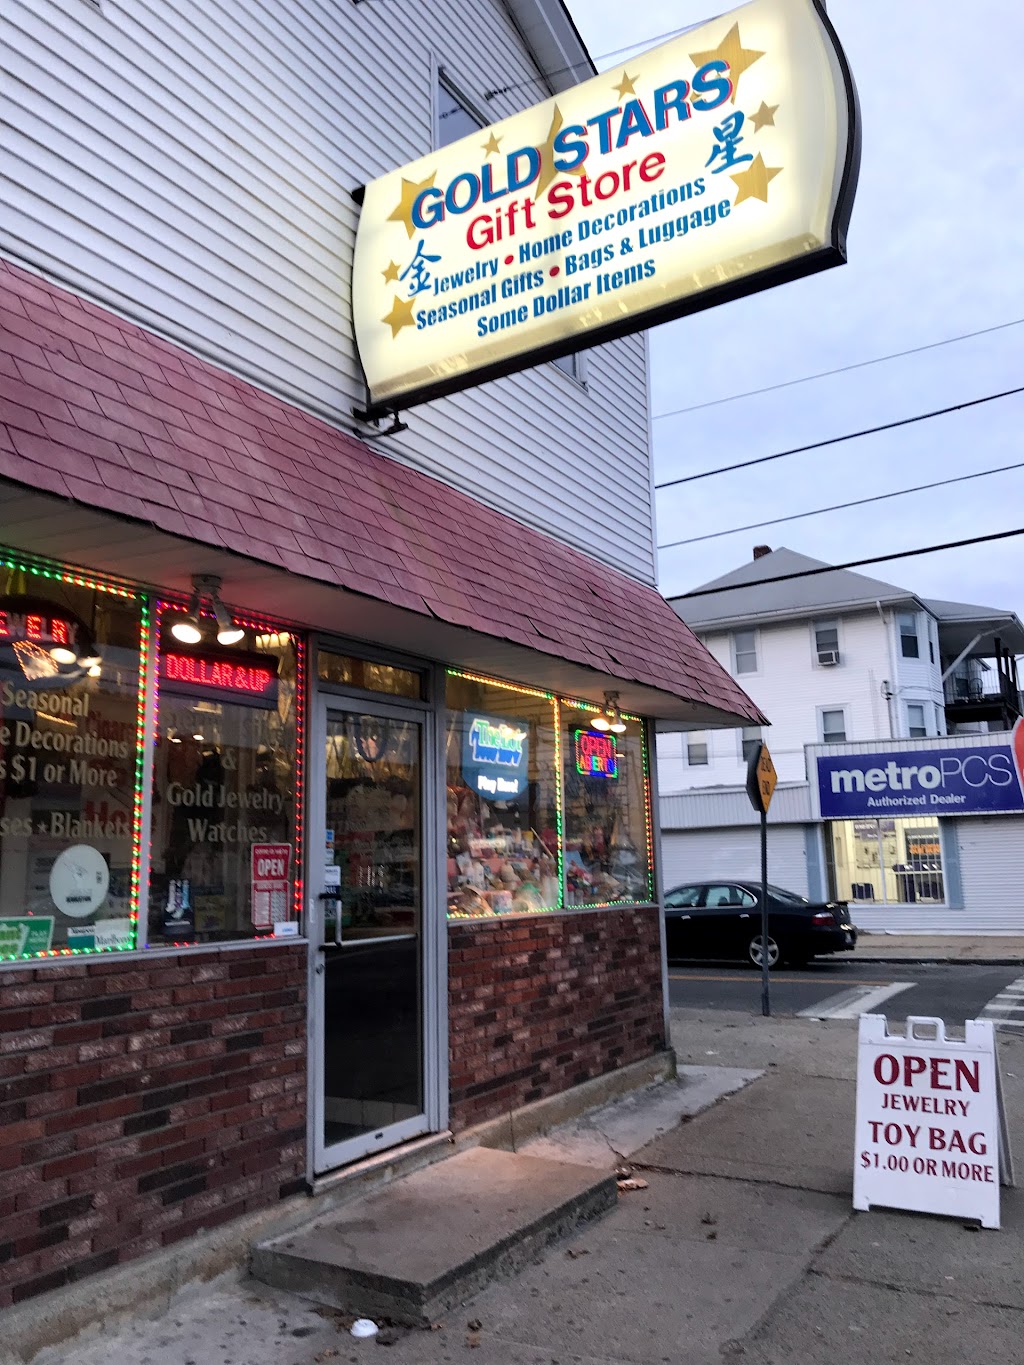 Gold Stars Gift Store | 484 Lonsdale Ave, Pawtucket, RI 02860 | Phone: (401) 365-1211